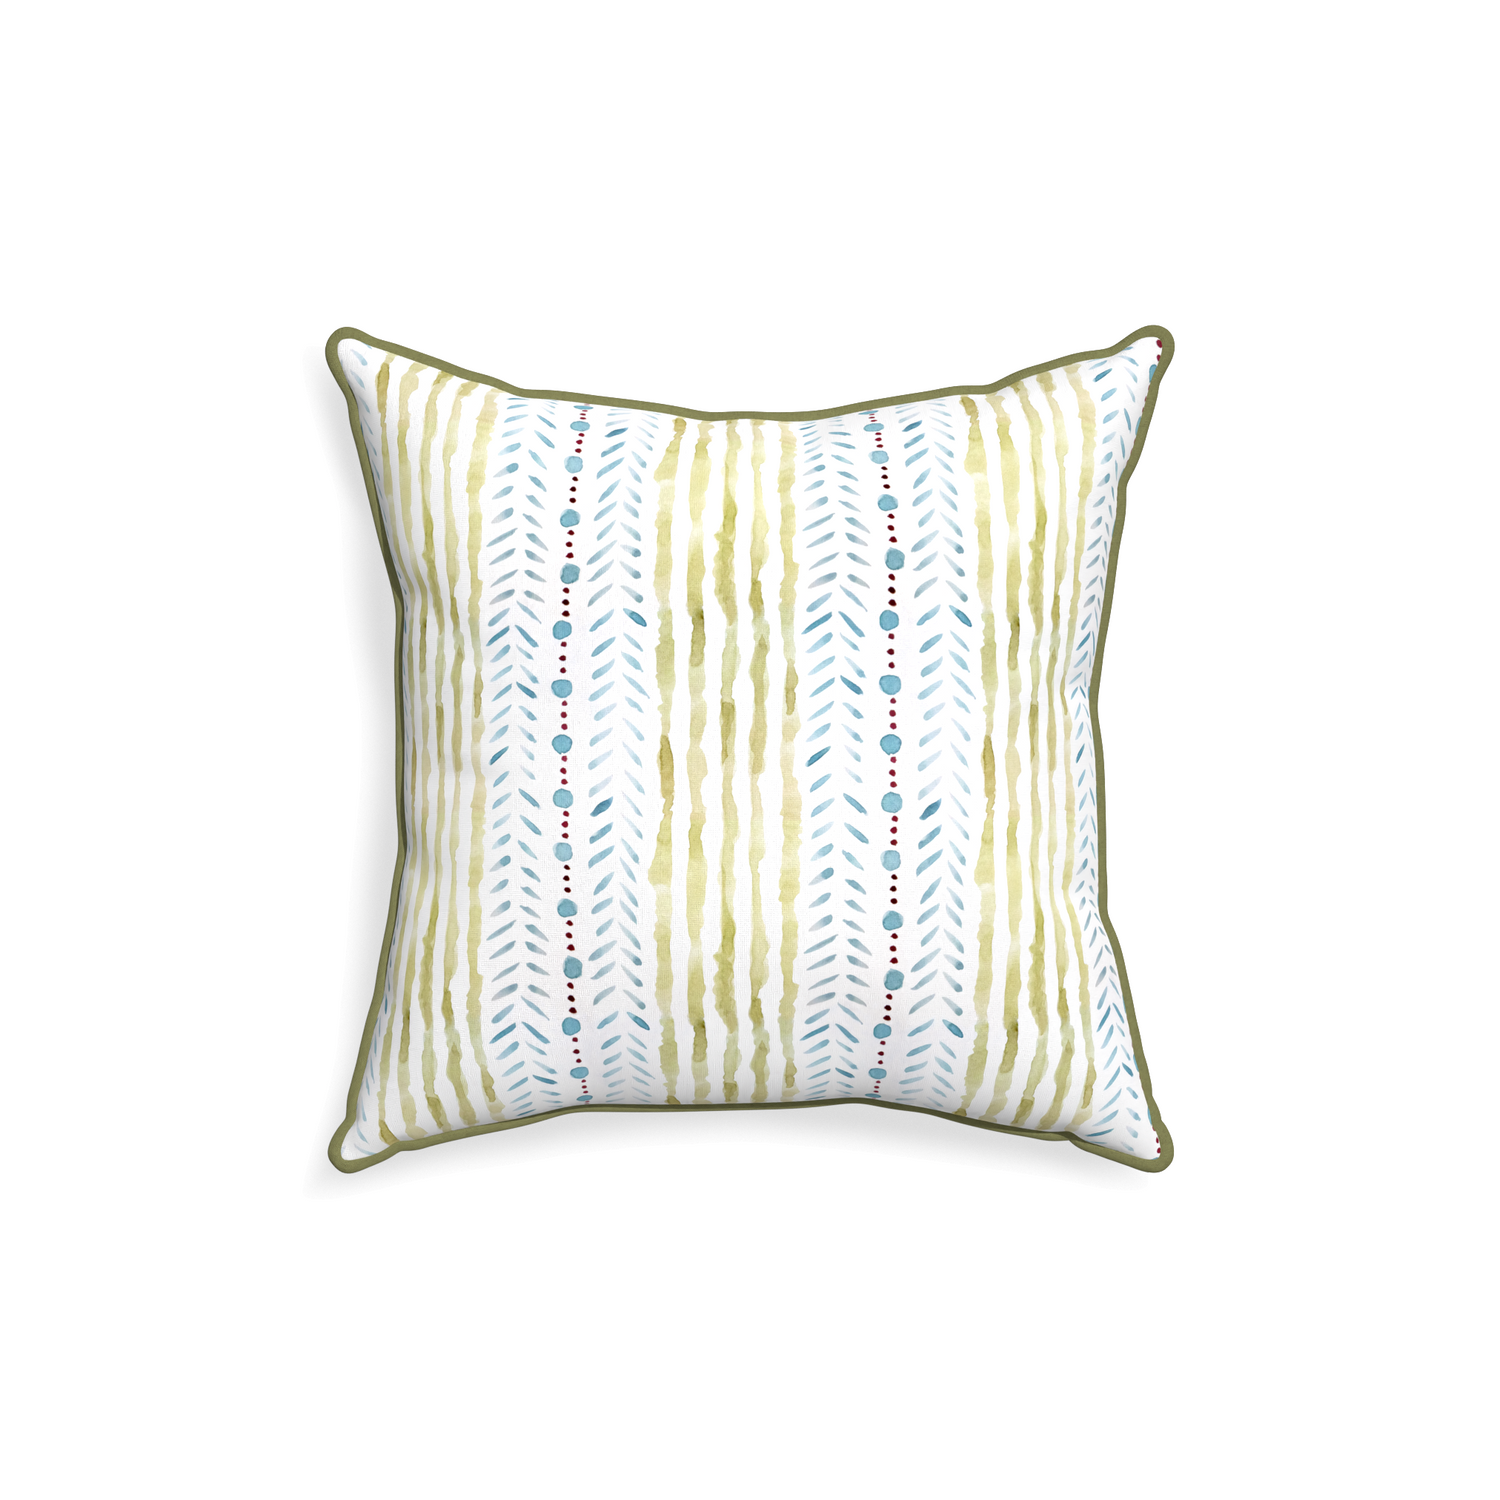 square blue and green striped pillow with moss green piping